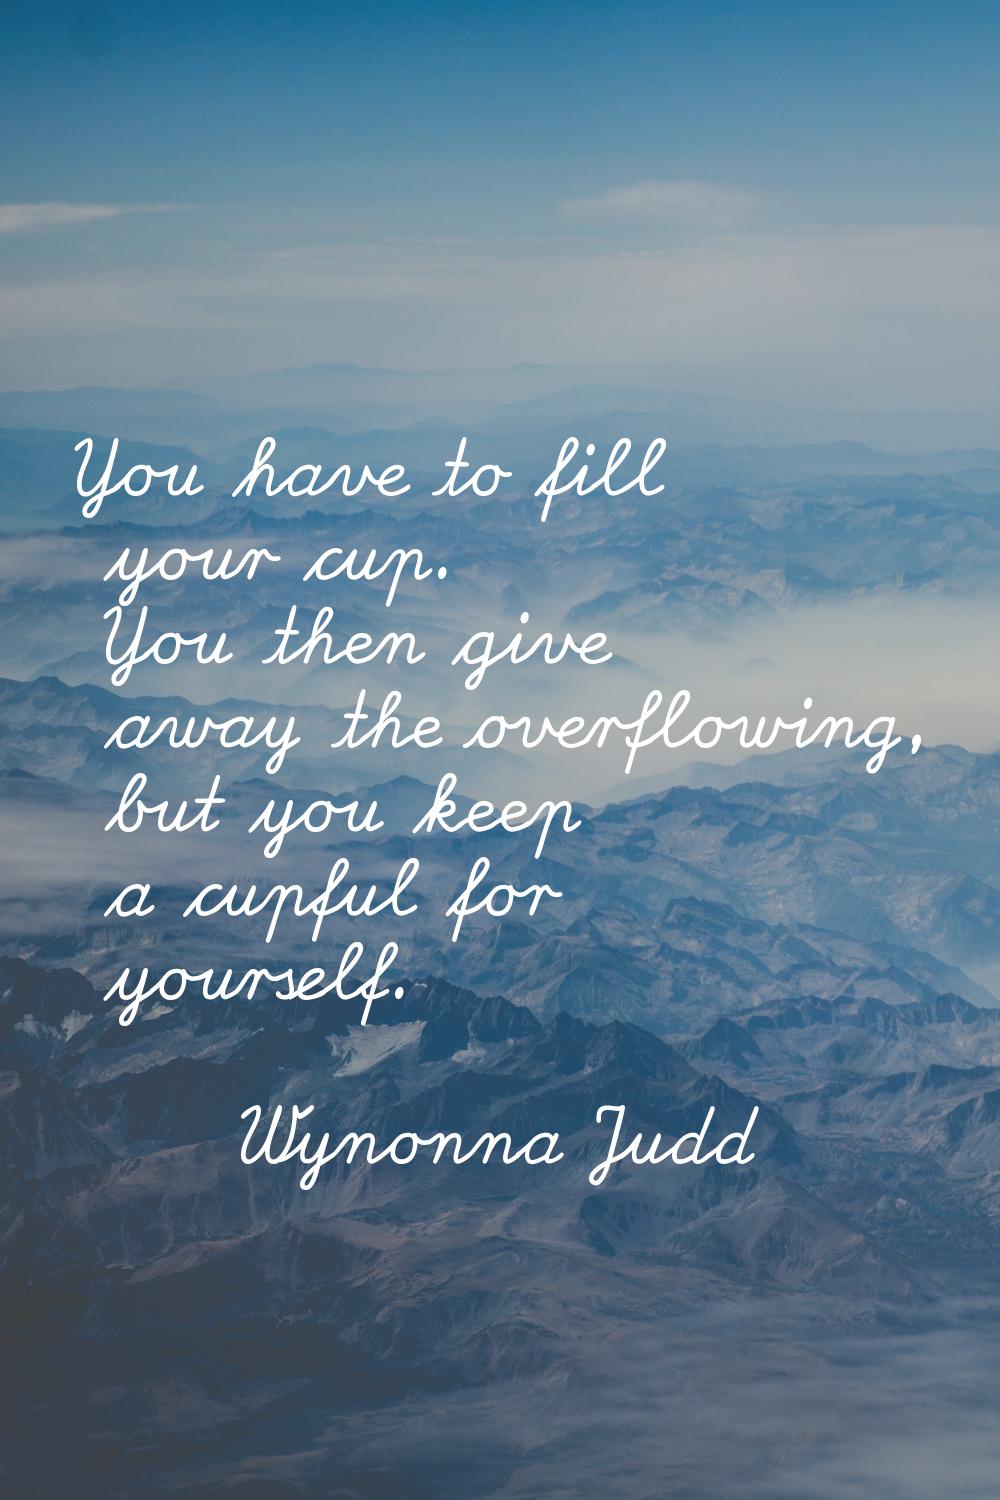 You have to fill your cup. You then give away the overflowing, but you keep a cupful for yourself.